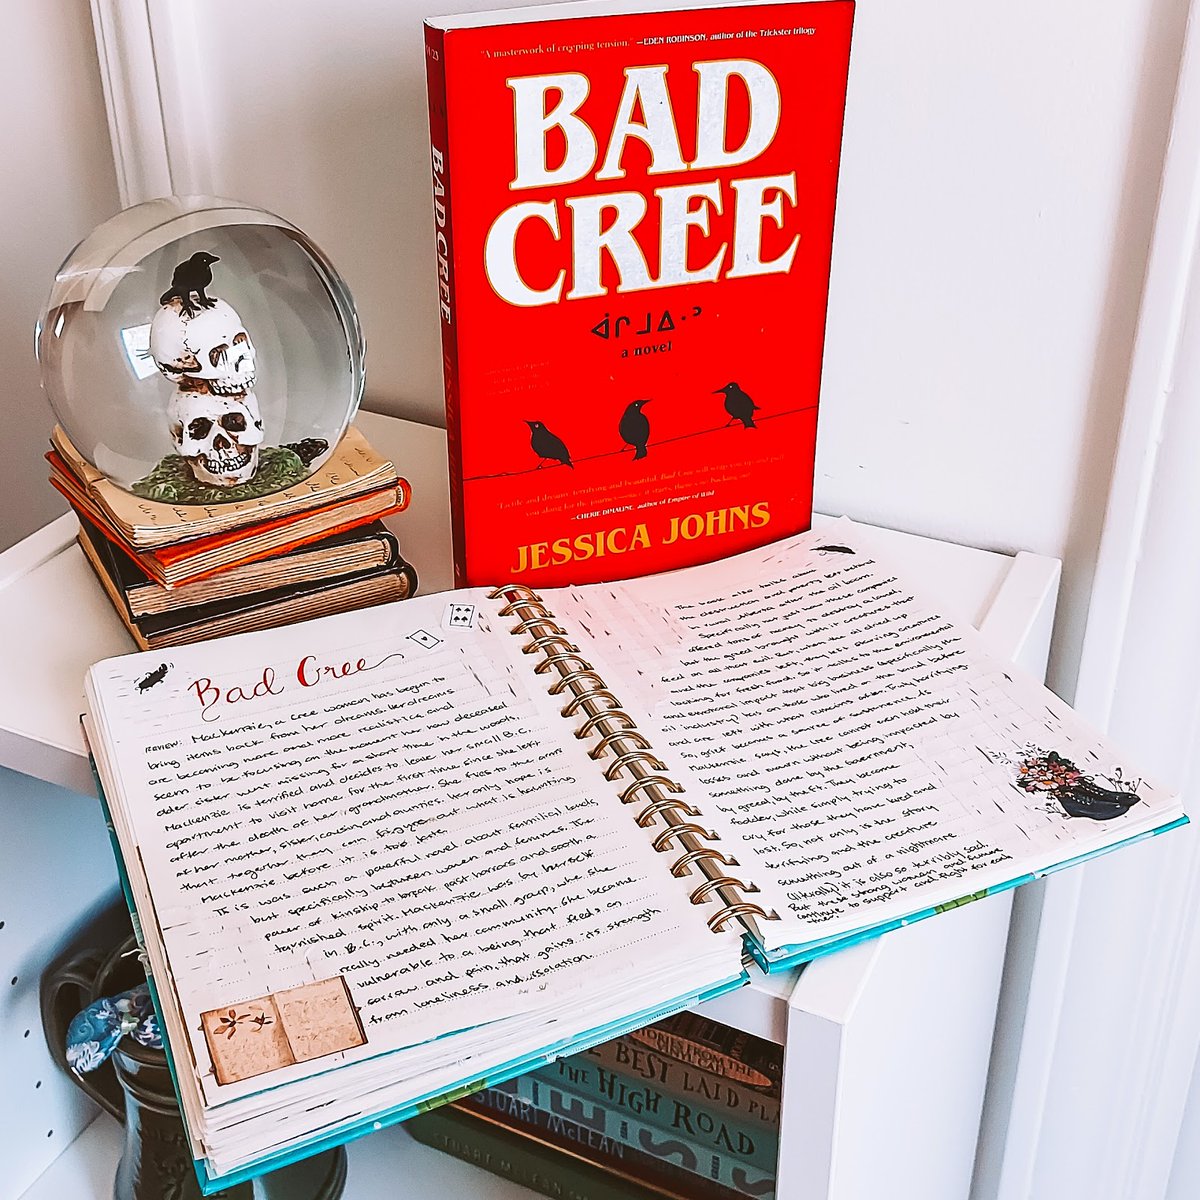 New #BookReview. Bad Cree, by Jessica Johns, is a book about grief and loss and monsters

onemamassummer.weebly.com/book-reviews/b…

#OneMamaReads #BadCree #JessicaJohns #HarperCollins #BookBlog #SavvyReader #50BookPledge #BookBlogger #BooksOfHCC #DiverseReads #IndigenousReads #LiteraryFiction